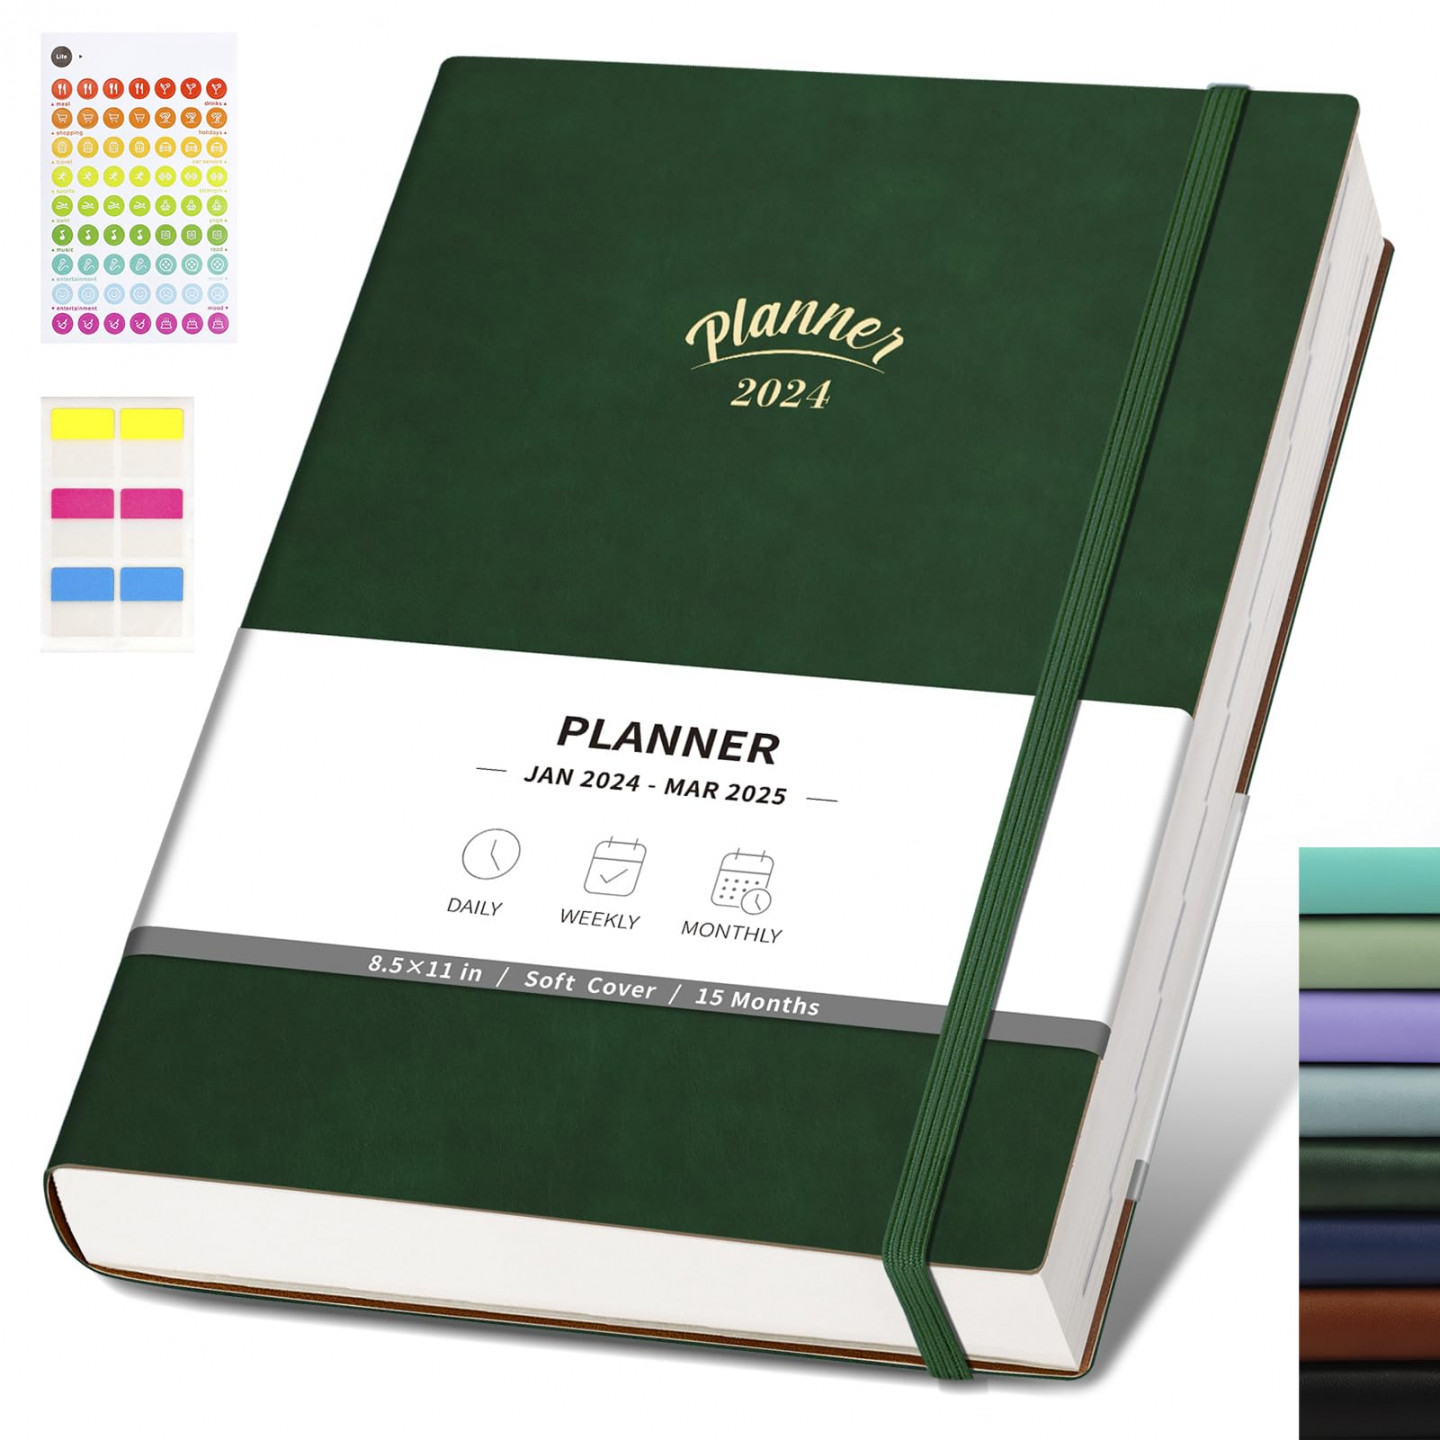 Planner - Weekly and Monthly - RETTACY Large  Planner with   Pages, A Monthly CalendaSee more Planner - Weekly and Monthly -